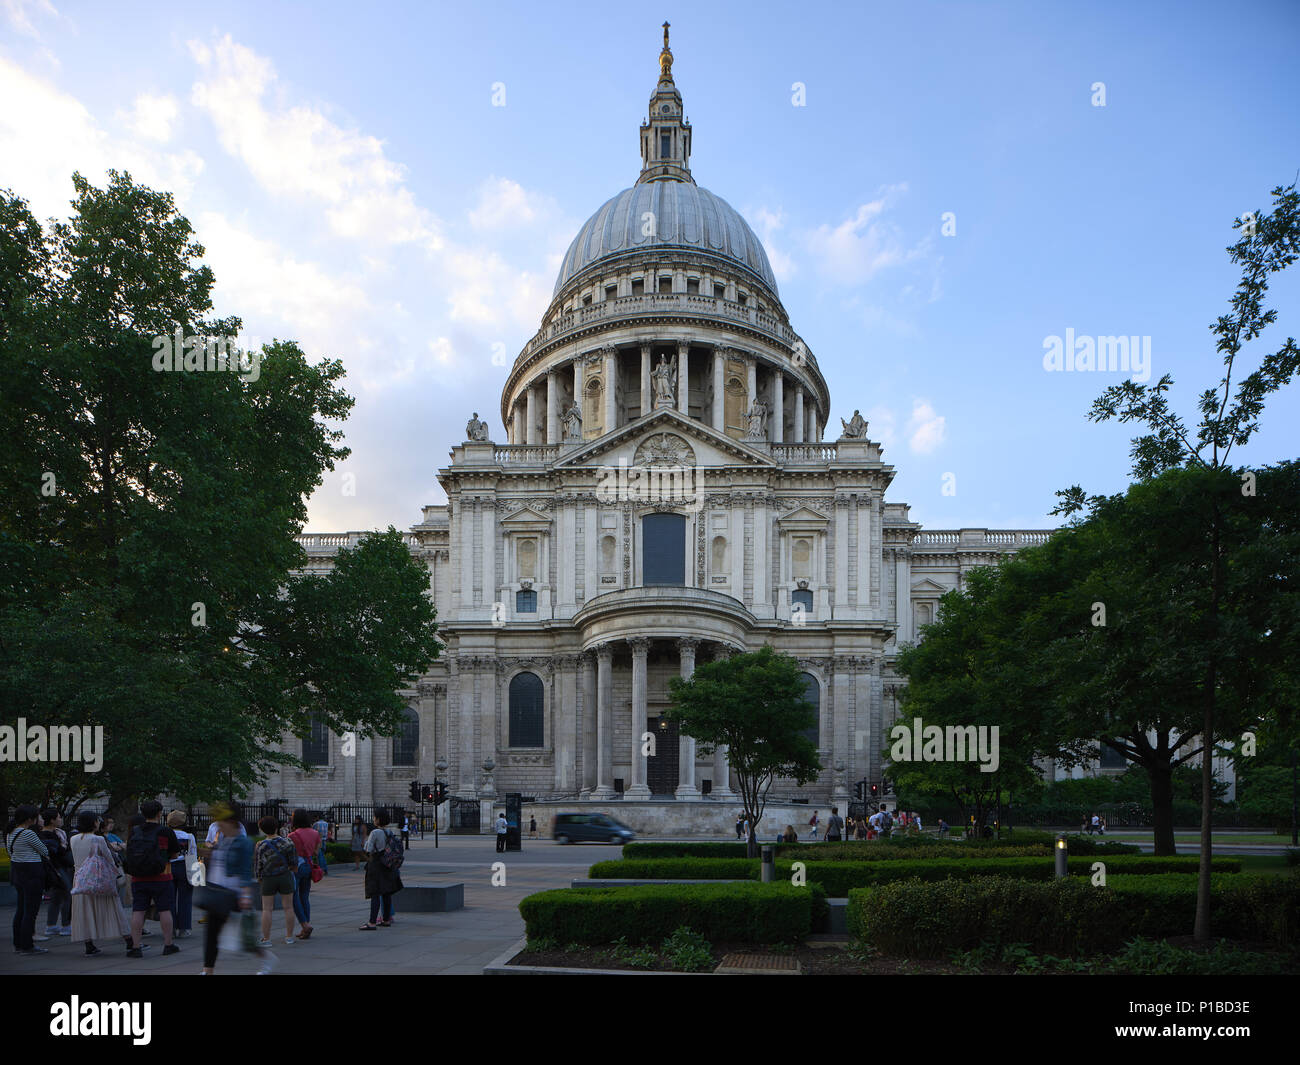 Saint Paul's Cathedral, London England. Stock Photo